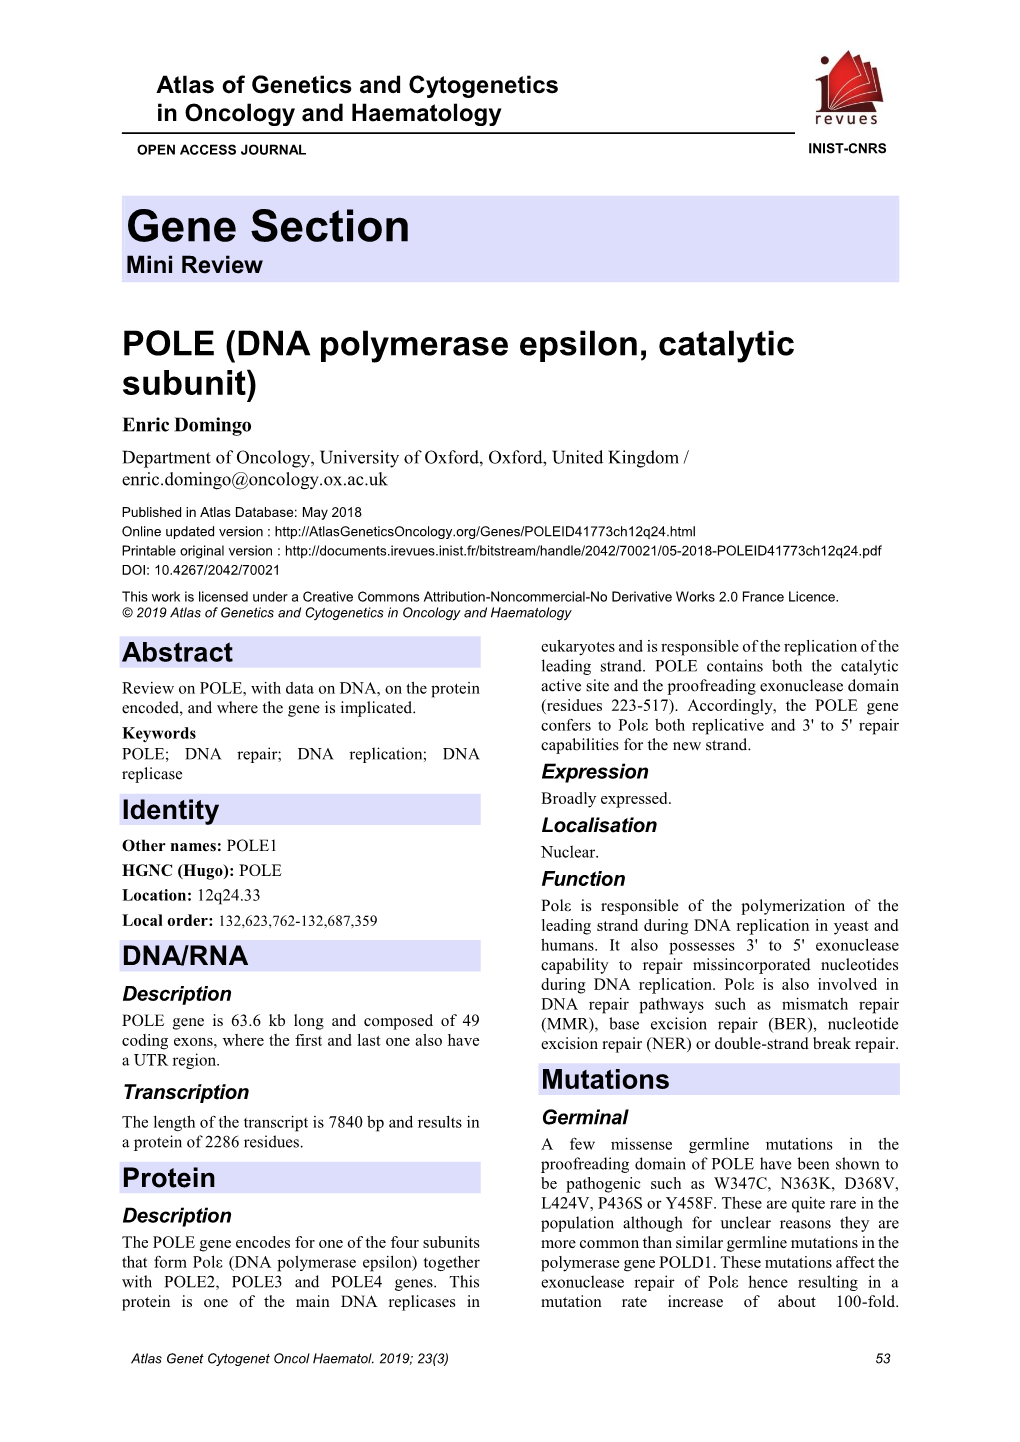 Gene Section Mini Review